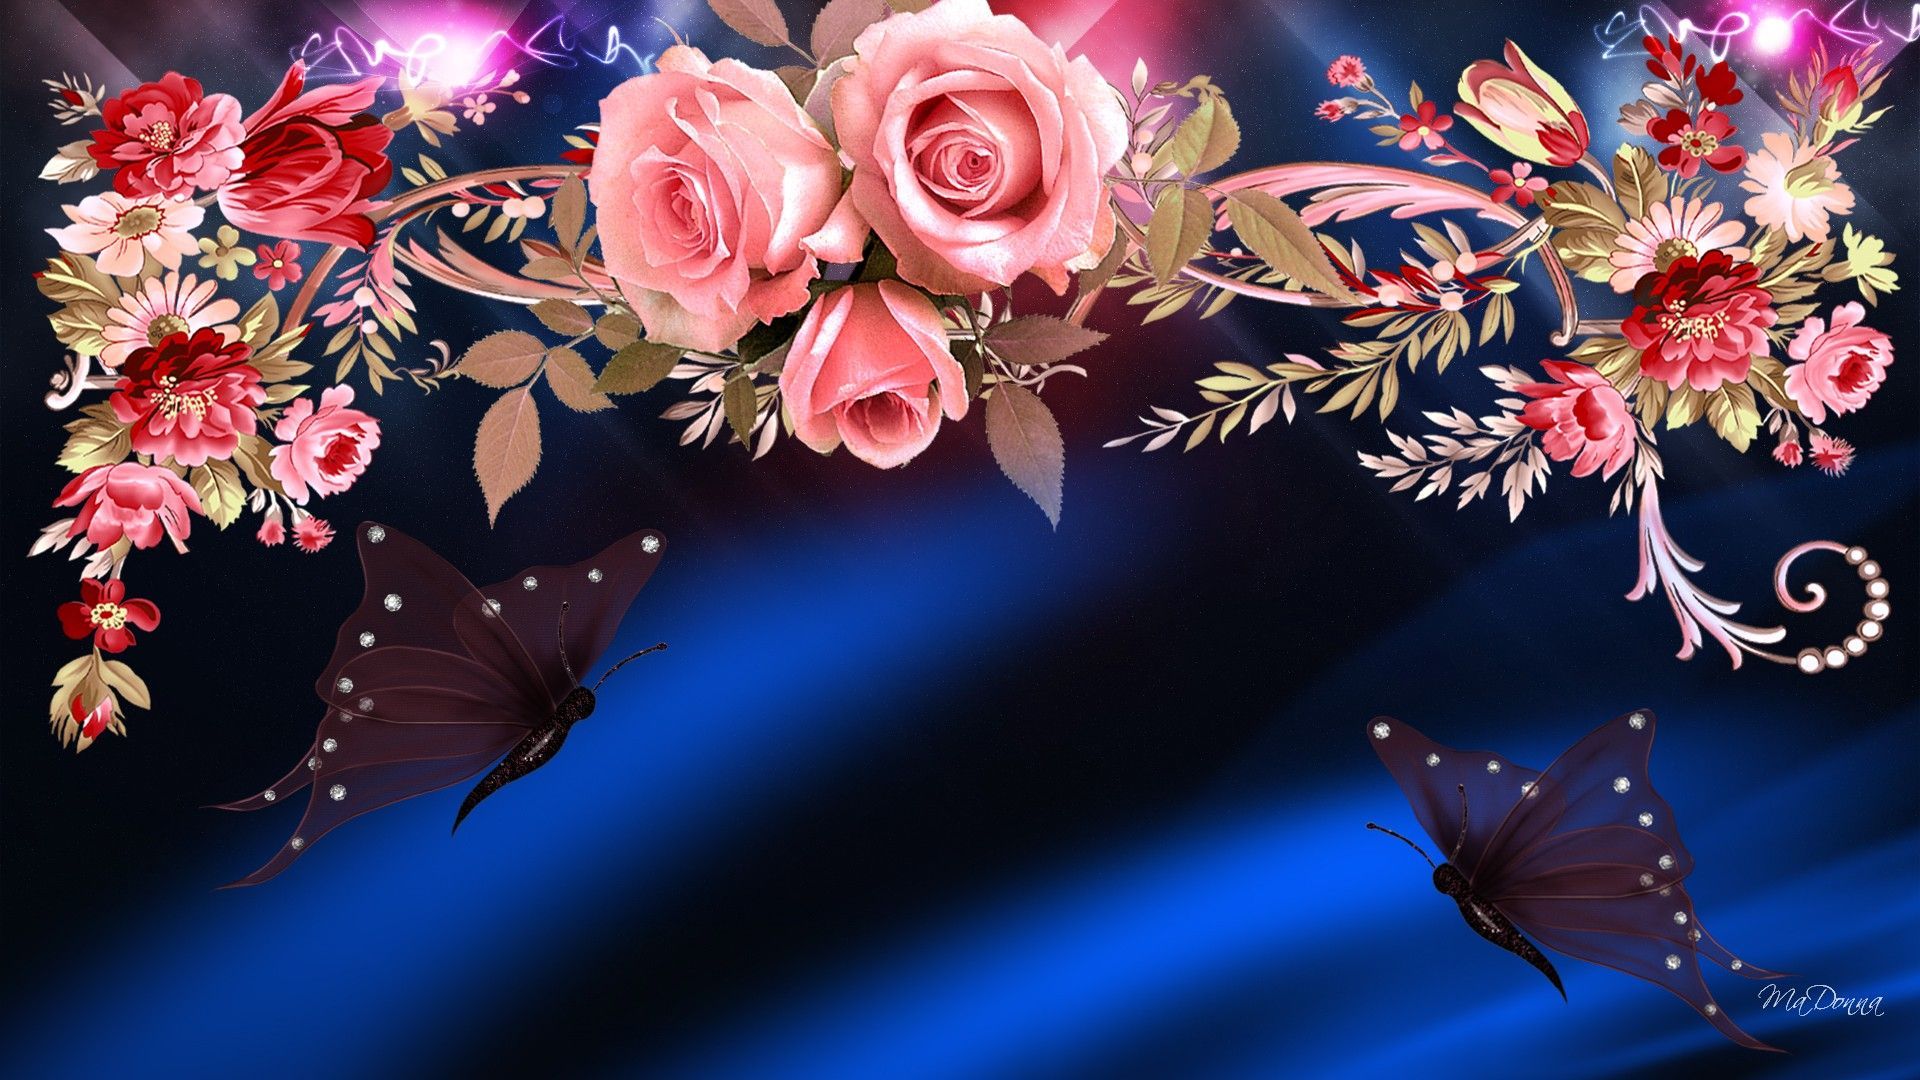 Unicorns Rainbows and Butterflies Background. HD Of Roses